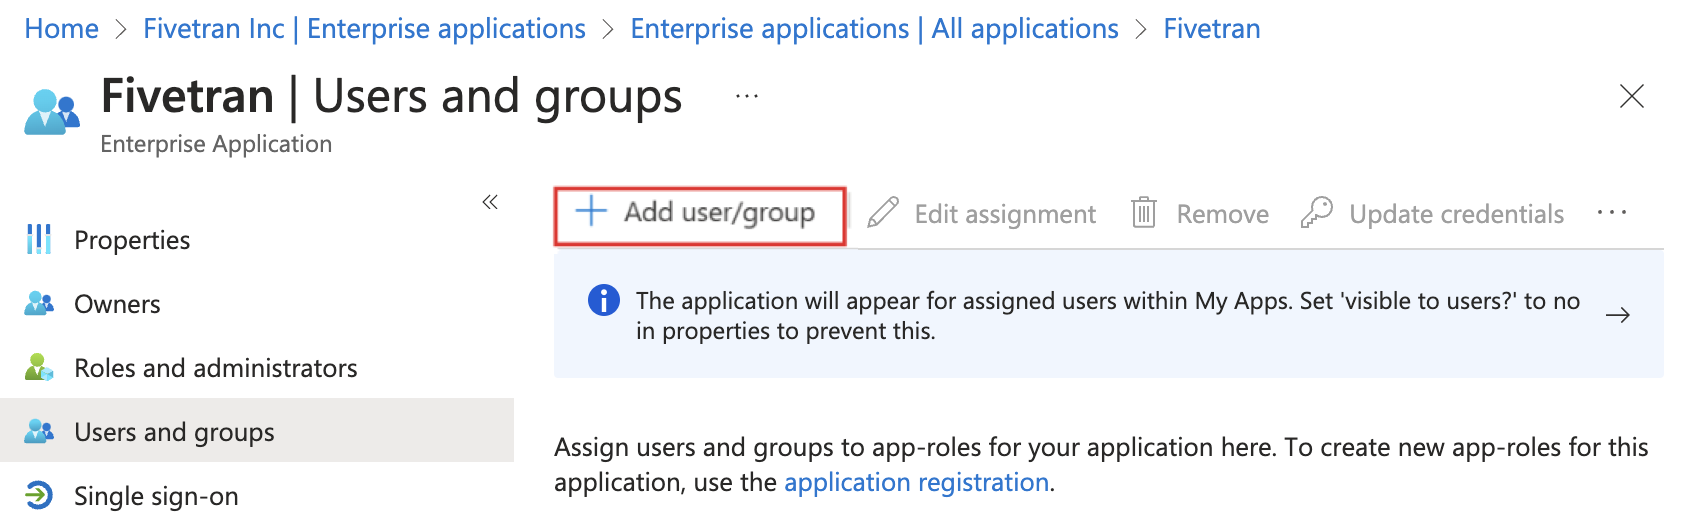 Assign users and groups